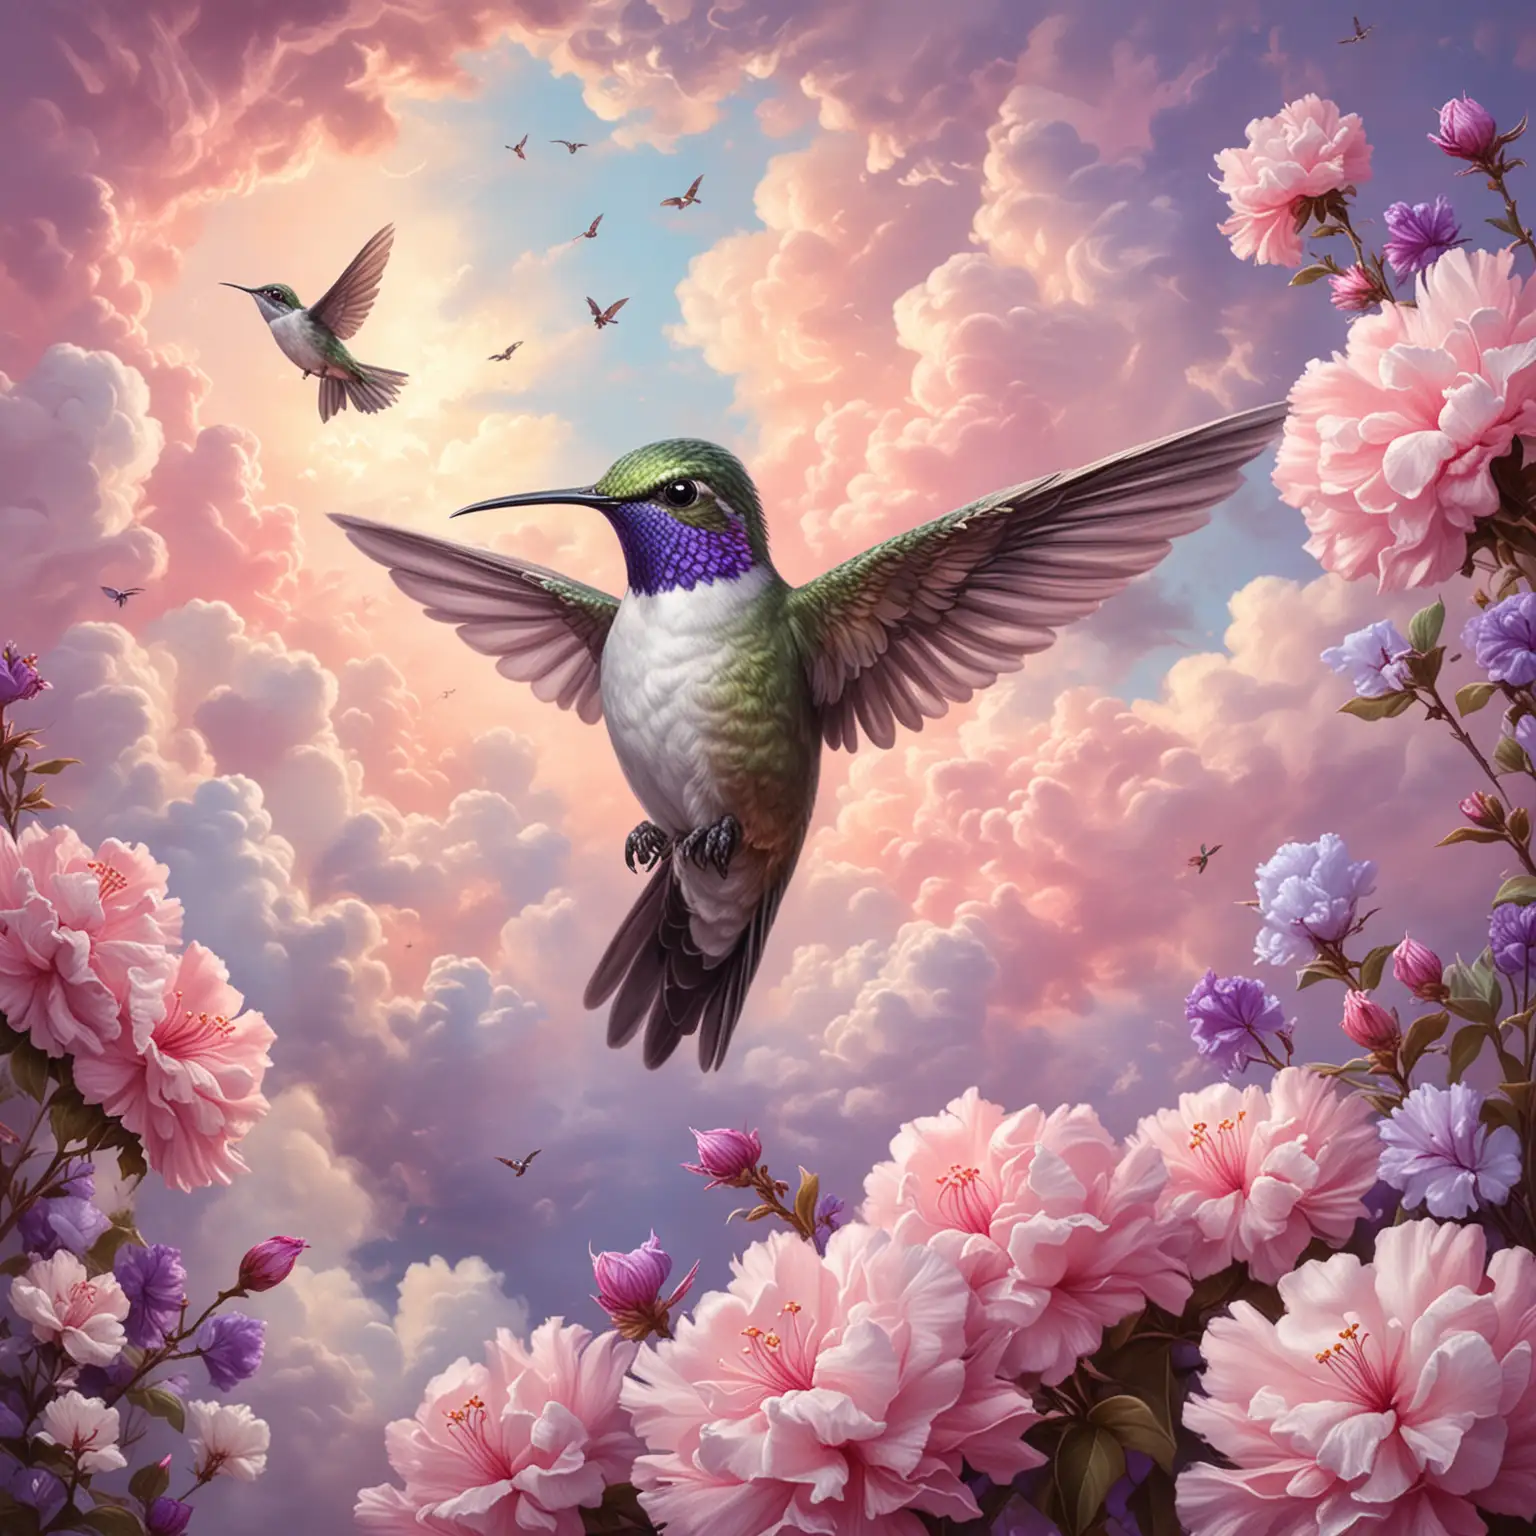 oil painting of a cute humming bird. Surrounded by pastel pink and purple cotton candy flowers and white cotton candy clouds. #F8C8DC